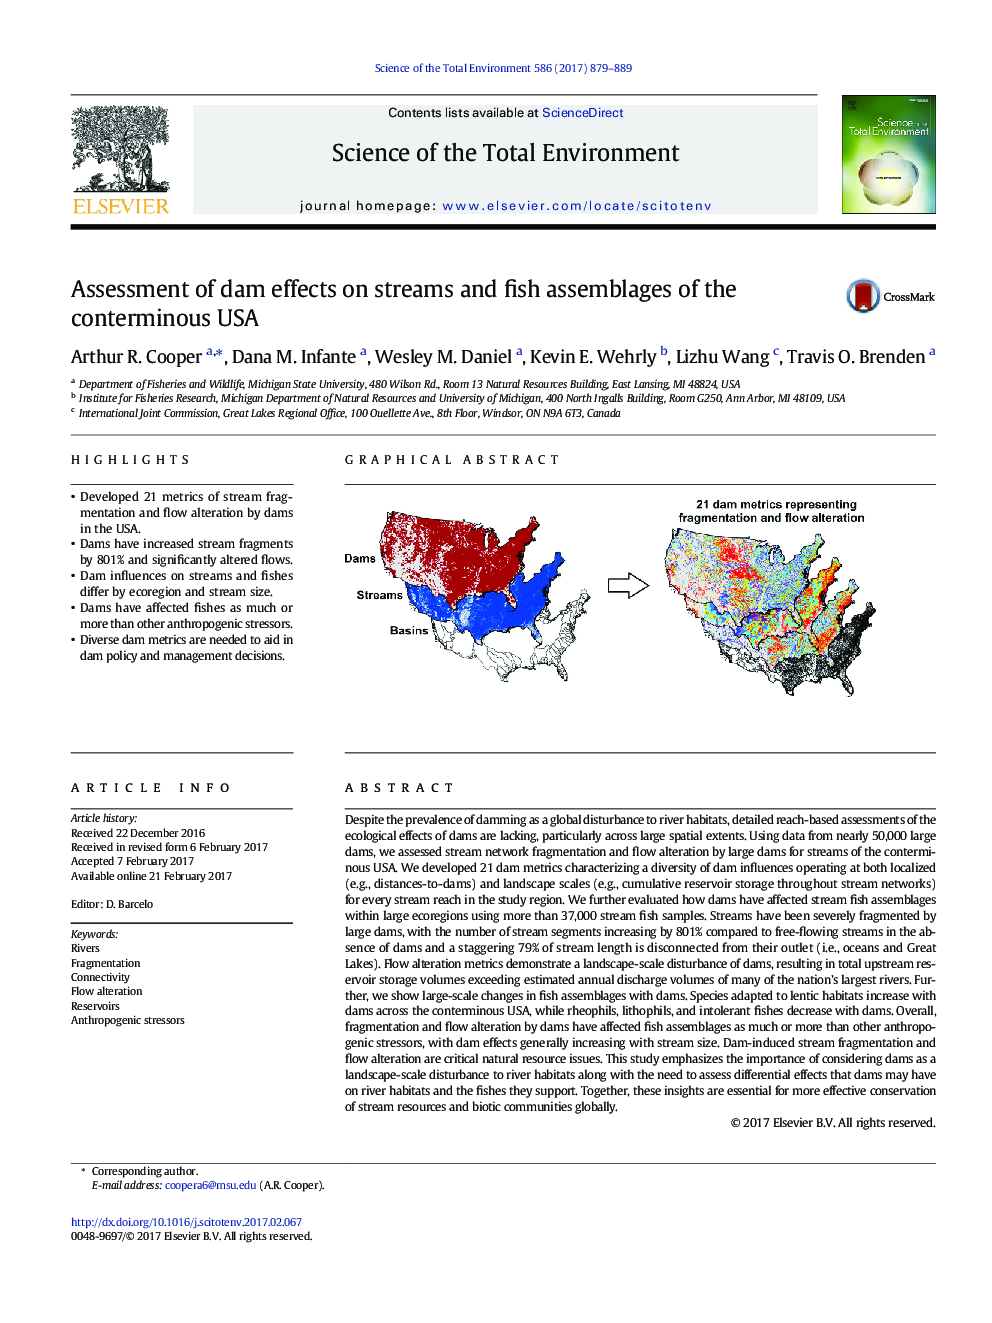 Assessment of dam effects on streams and fish assemblages of the conterminous USA